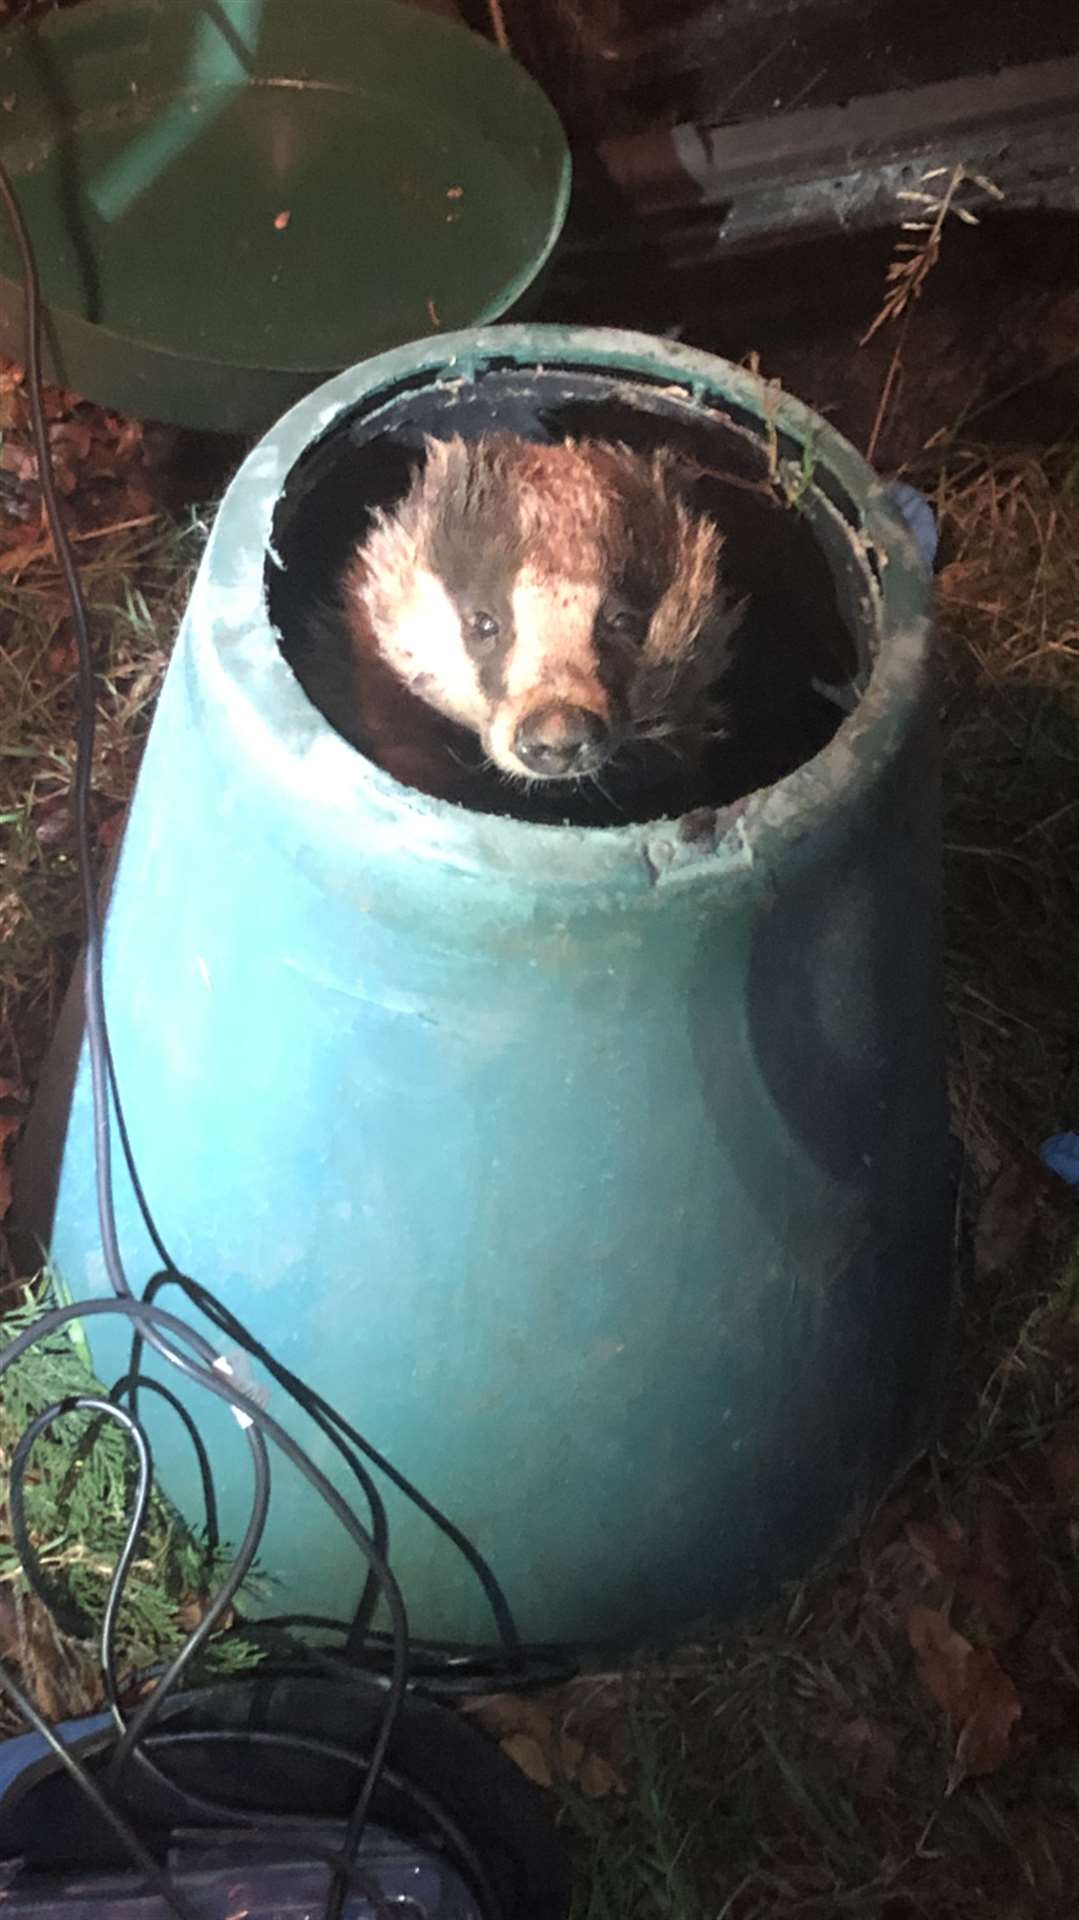 A badger in Guildford, Surrey, also had to be freed using special power tools after getting stuck in a two-foot compost bin (RSPCA/PA)